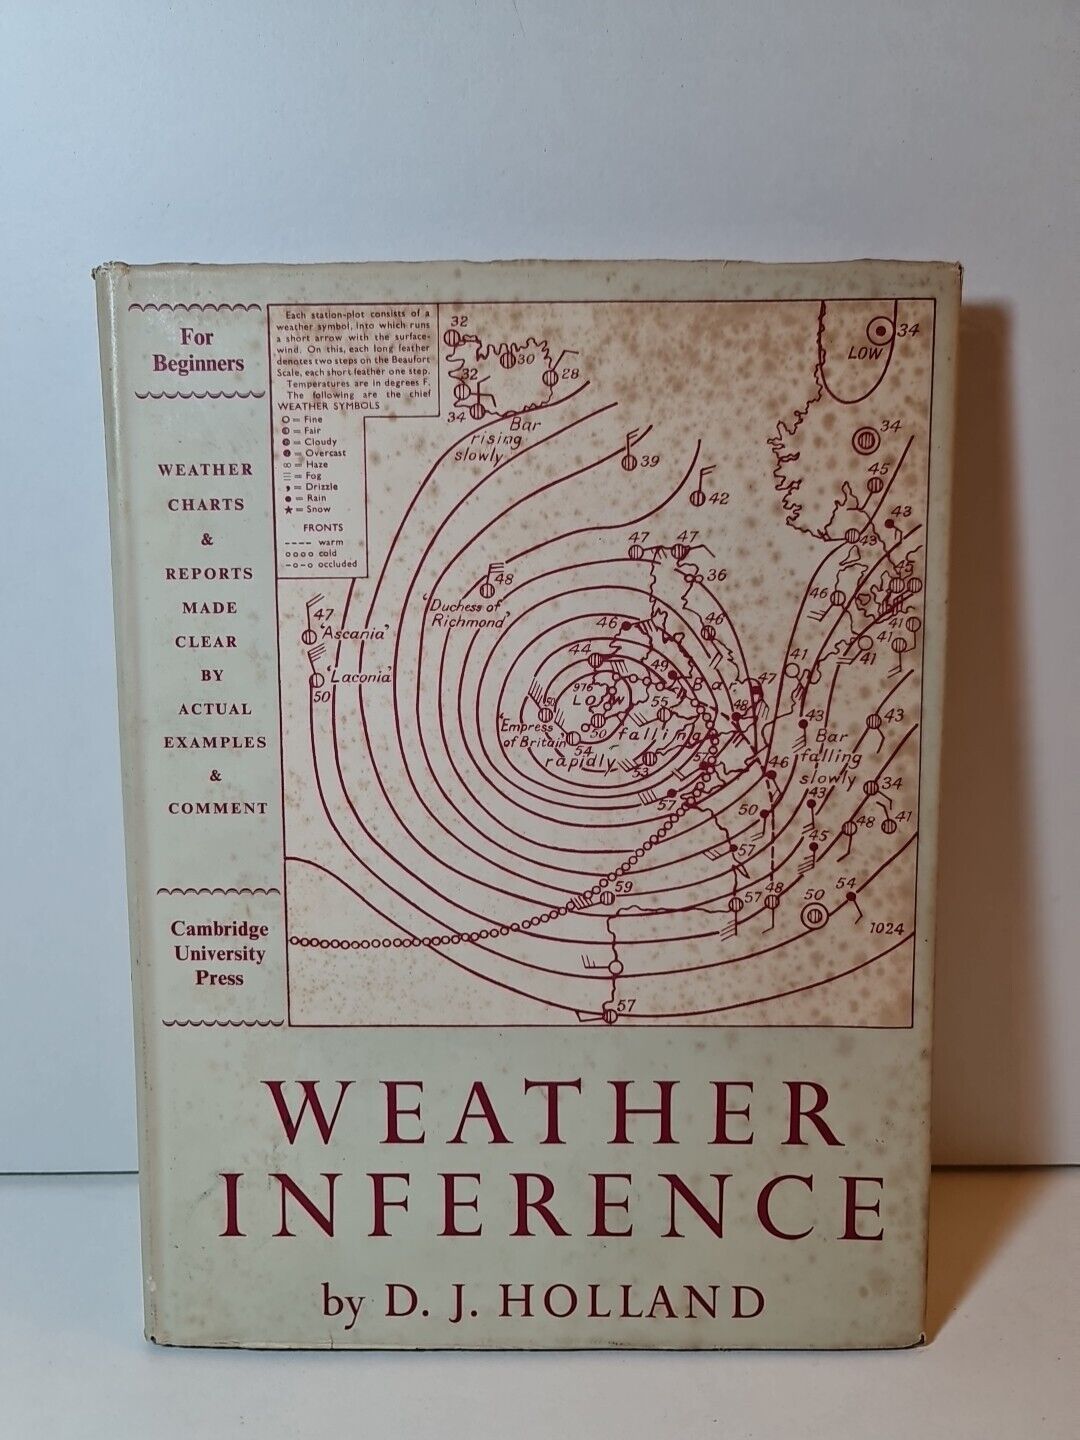 Weather Inference for Beginners by DJ Holland  (1953)